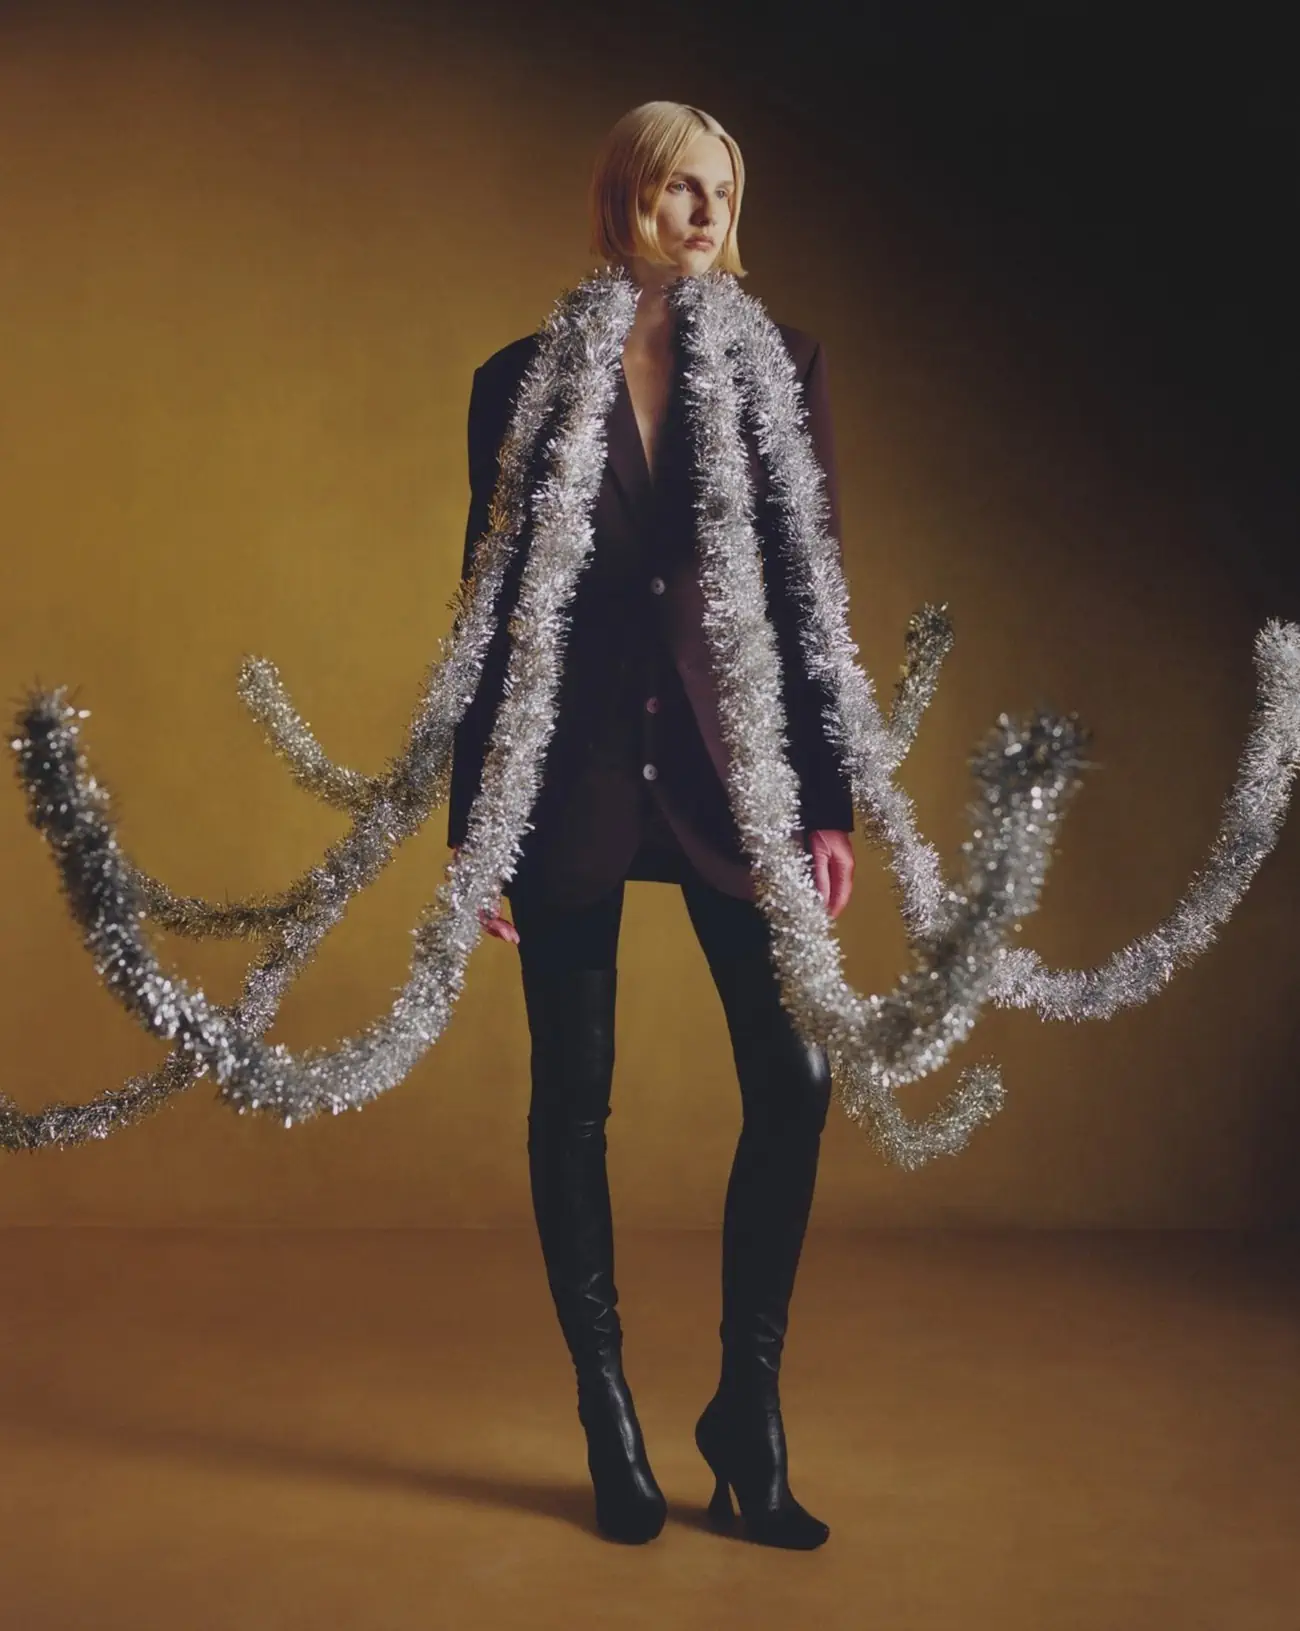 Lanvin's Holiday 2023 campaign captures a season of elegance